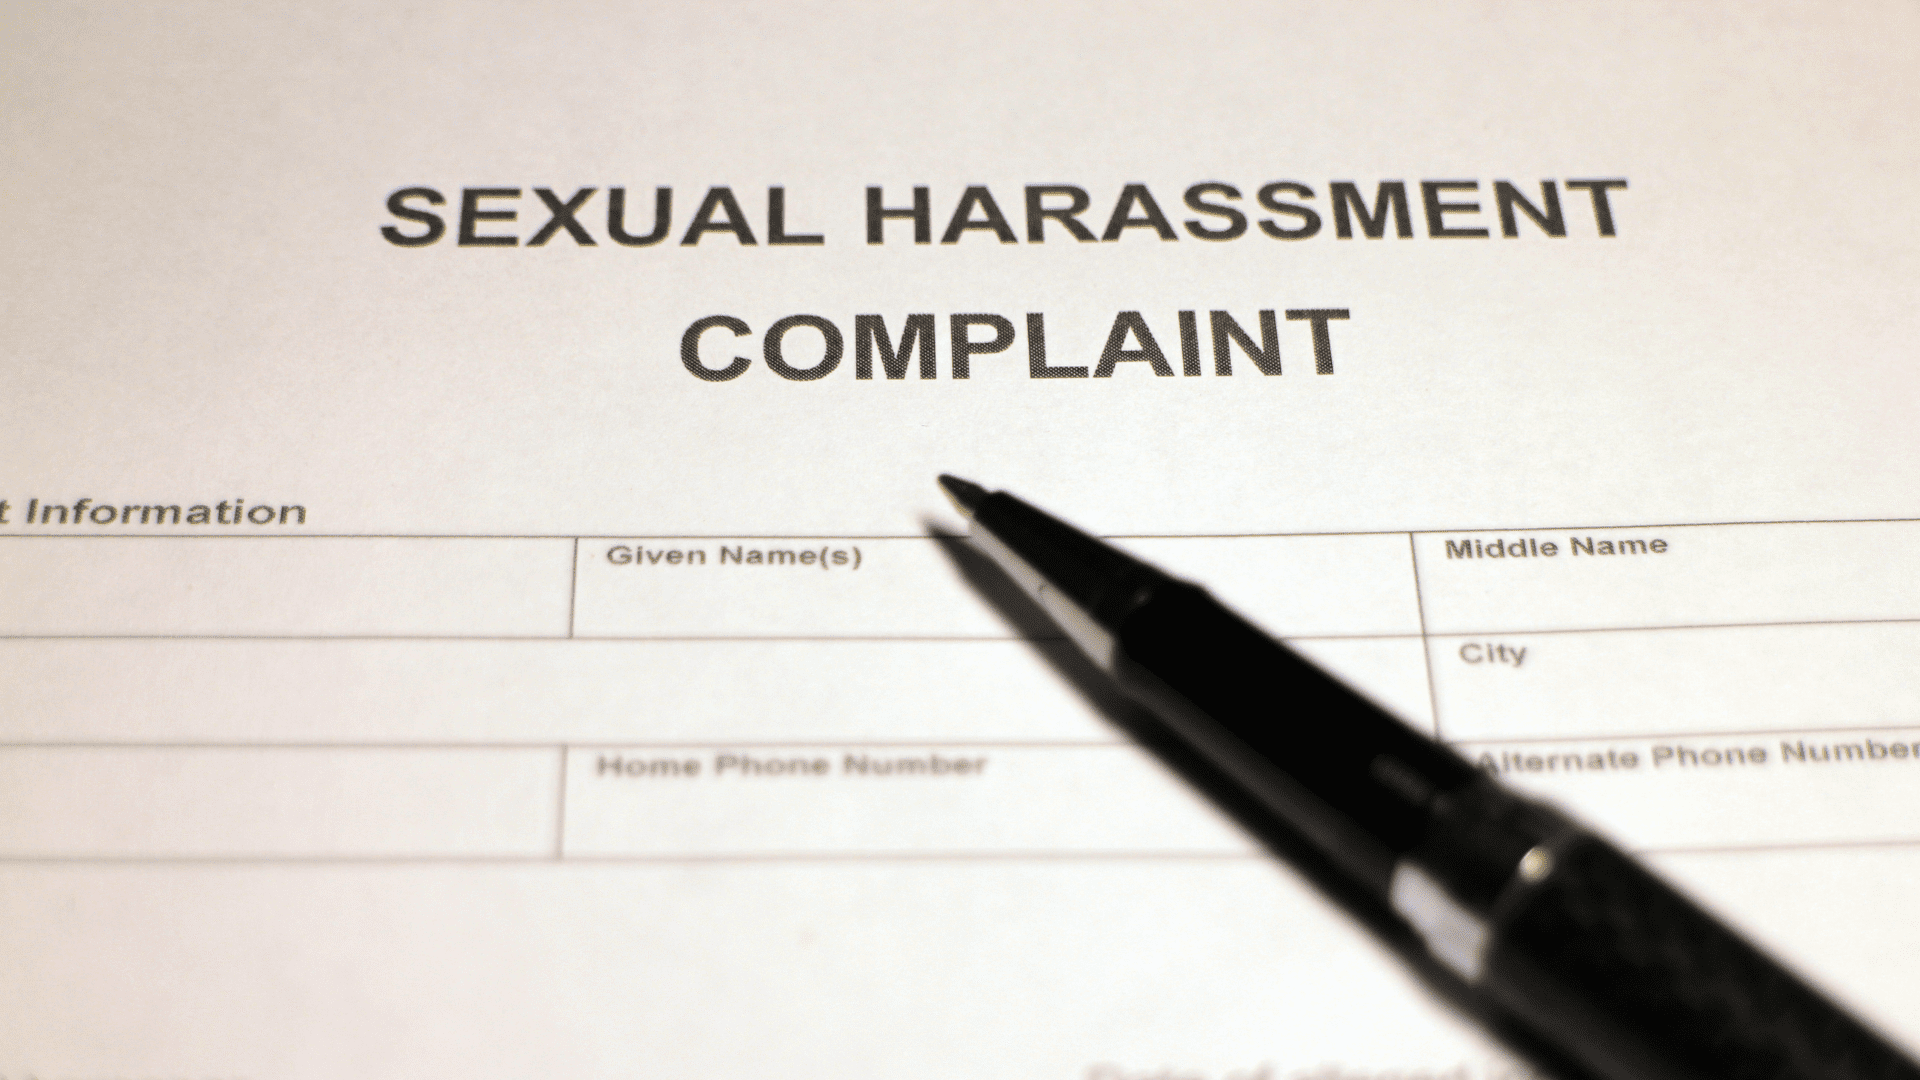 File A Sexual Harassment Complaint